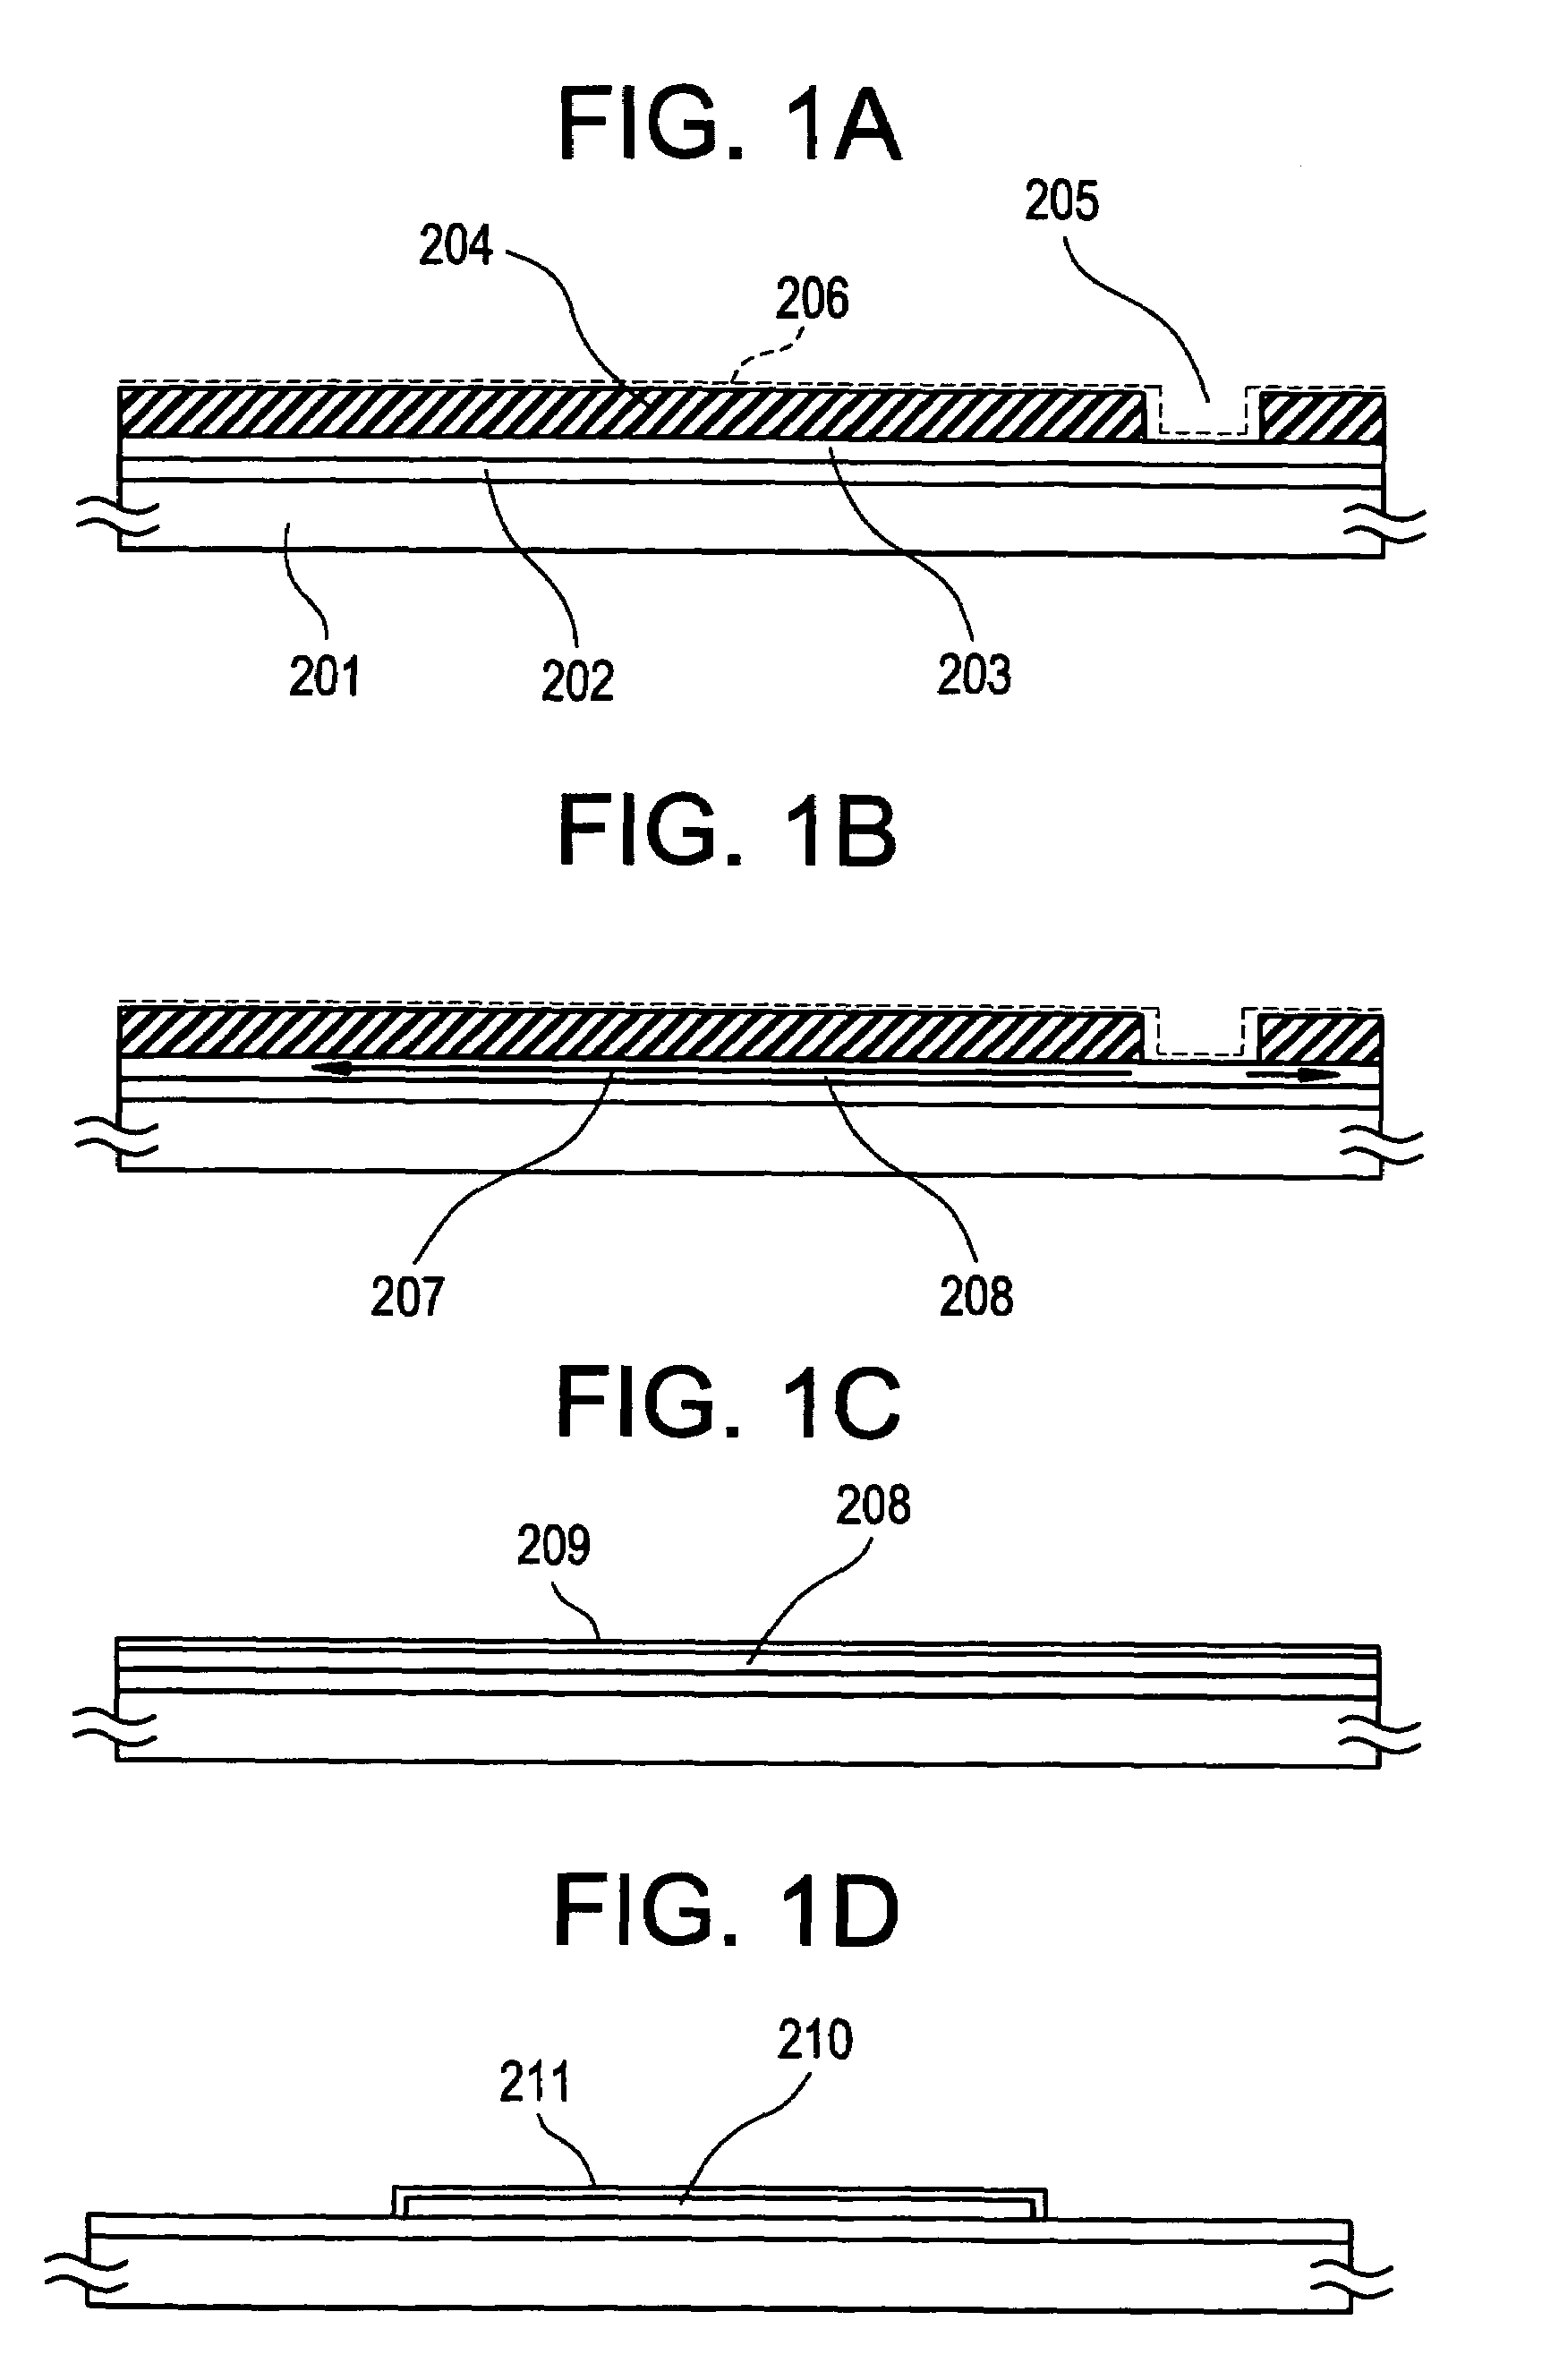 Semiconductor device having a crystalline semiconductor film